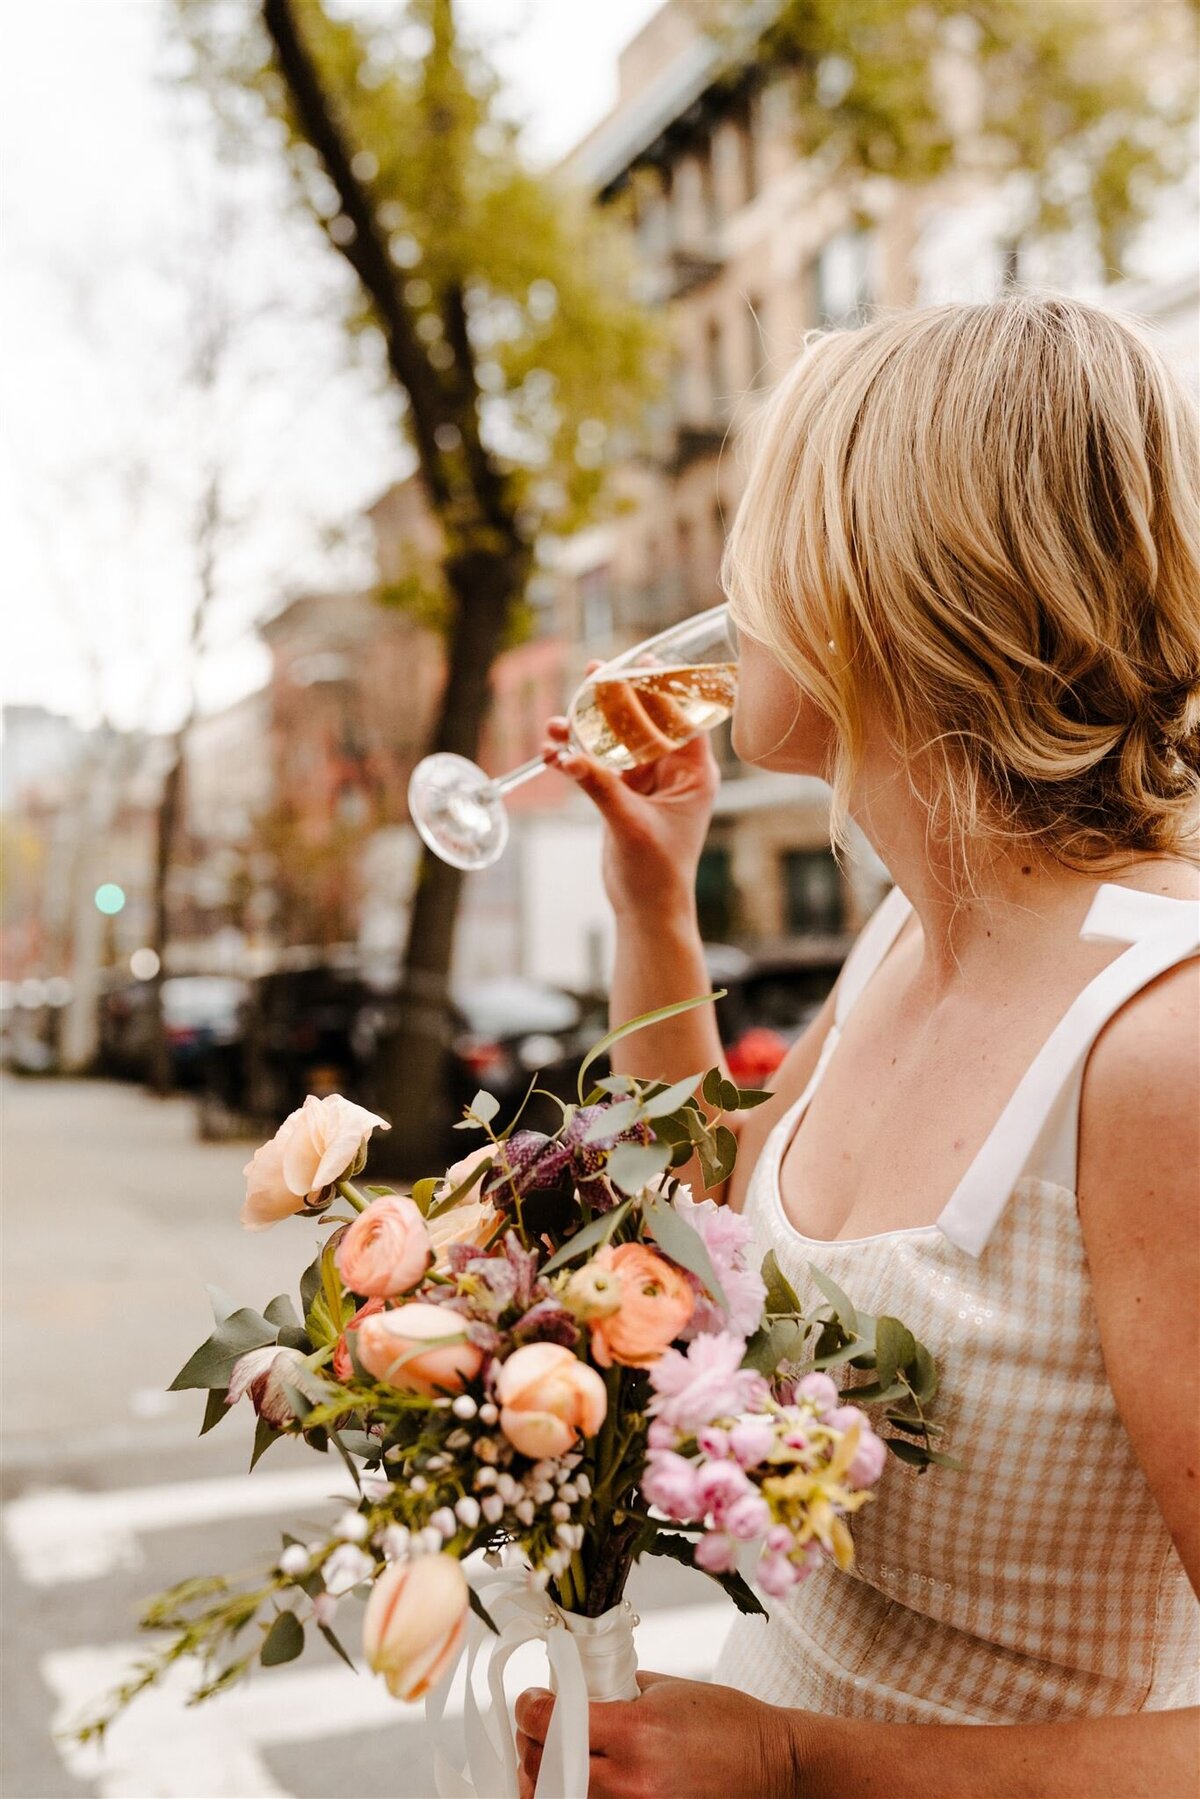 bride holding colorful flowers during wedding